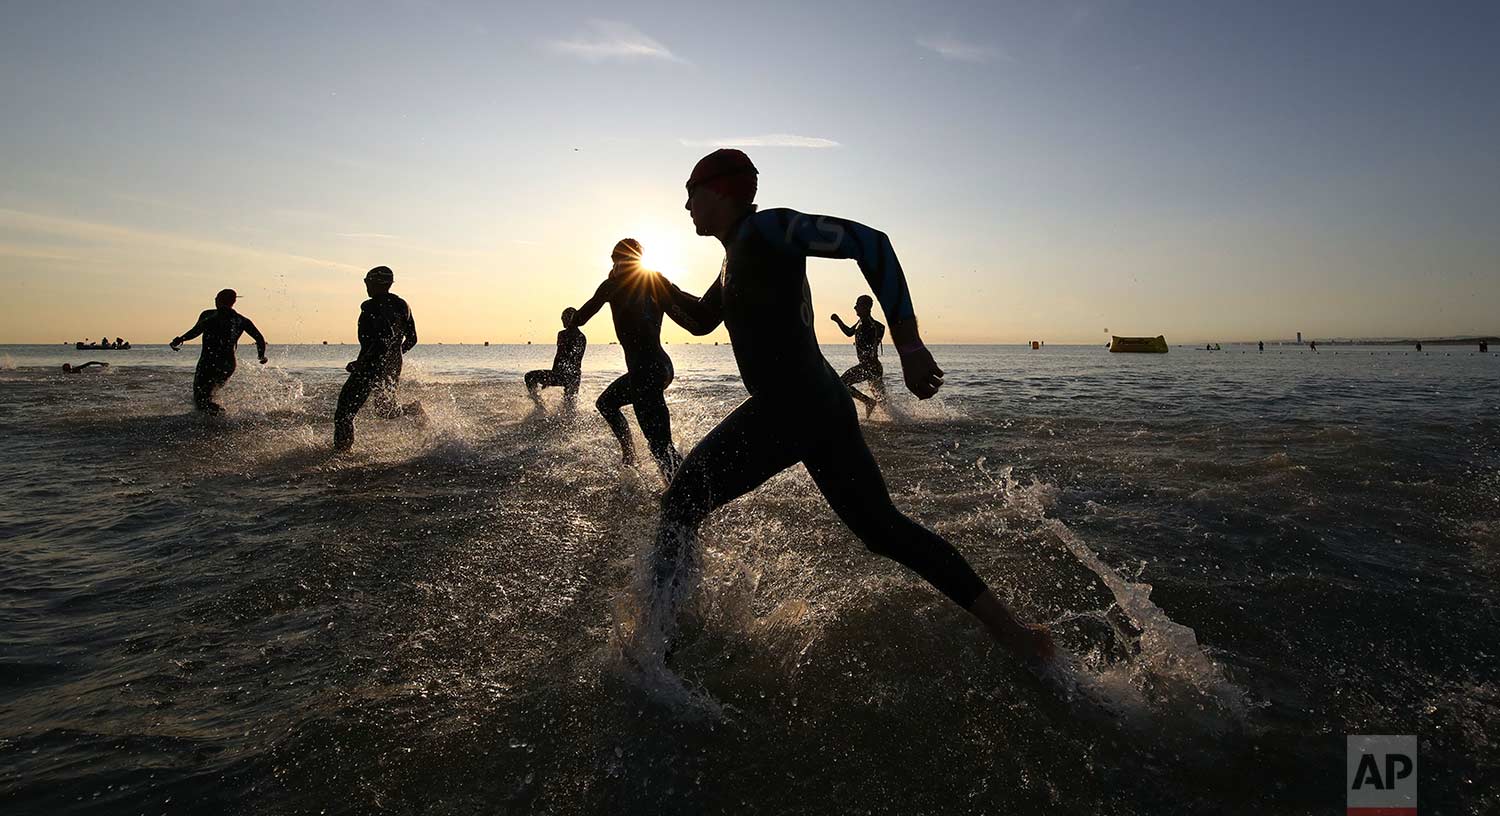  In this Saturday. Sept. 23, 2017 photo, athletes take the start of the swimming portion of an Ironman Triathlon competition, in Cervia, northern Italy. (AP Photo/Alessandro Trovati) 